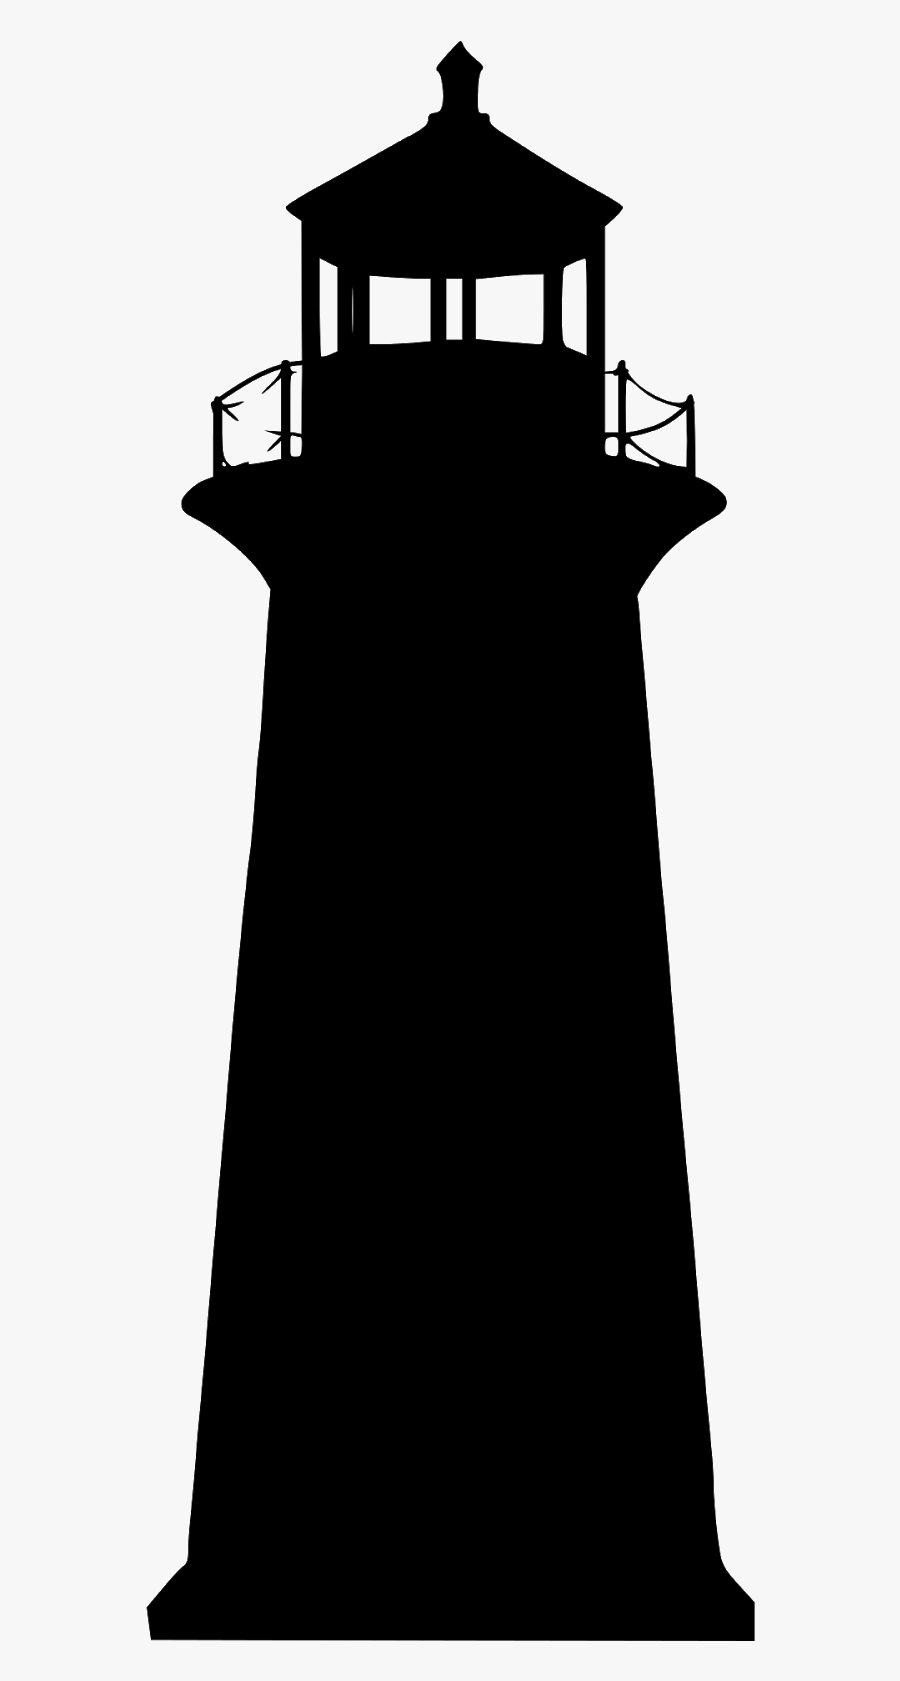 Lighthouse, Building, Silhouette, Beach, Direction, - Vector Transparent Lighthouse Silhouette, Transparent Clipart